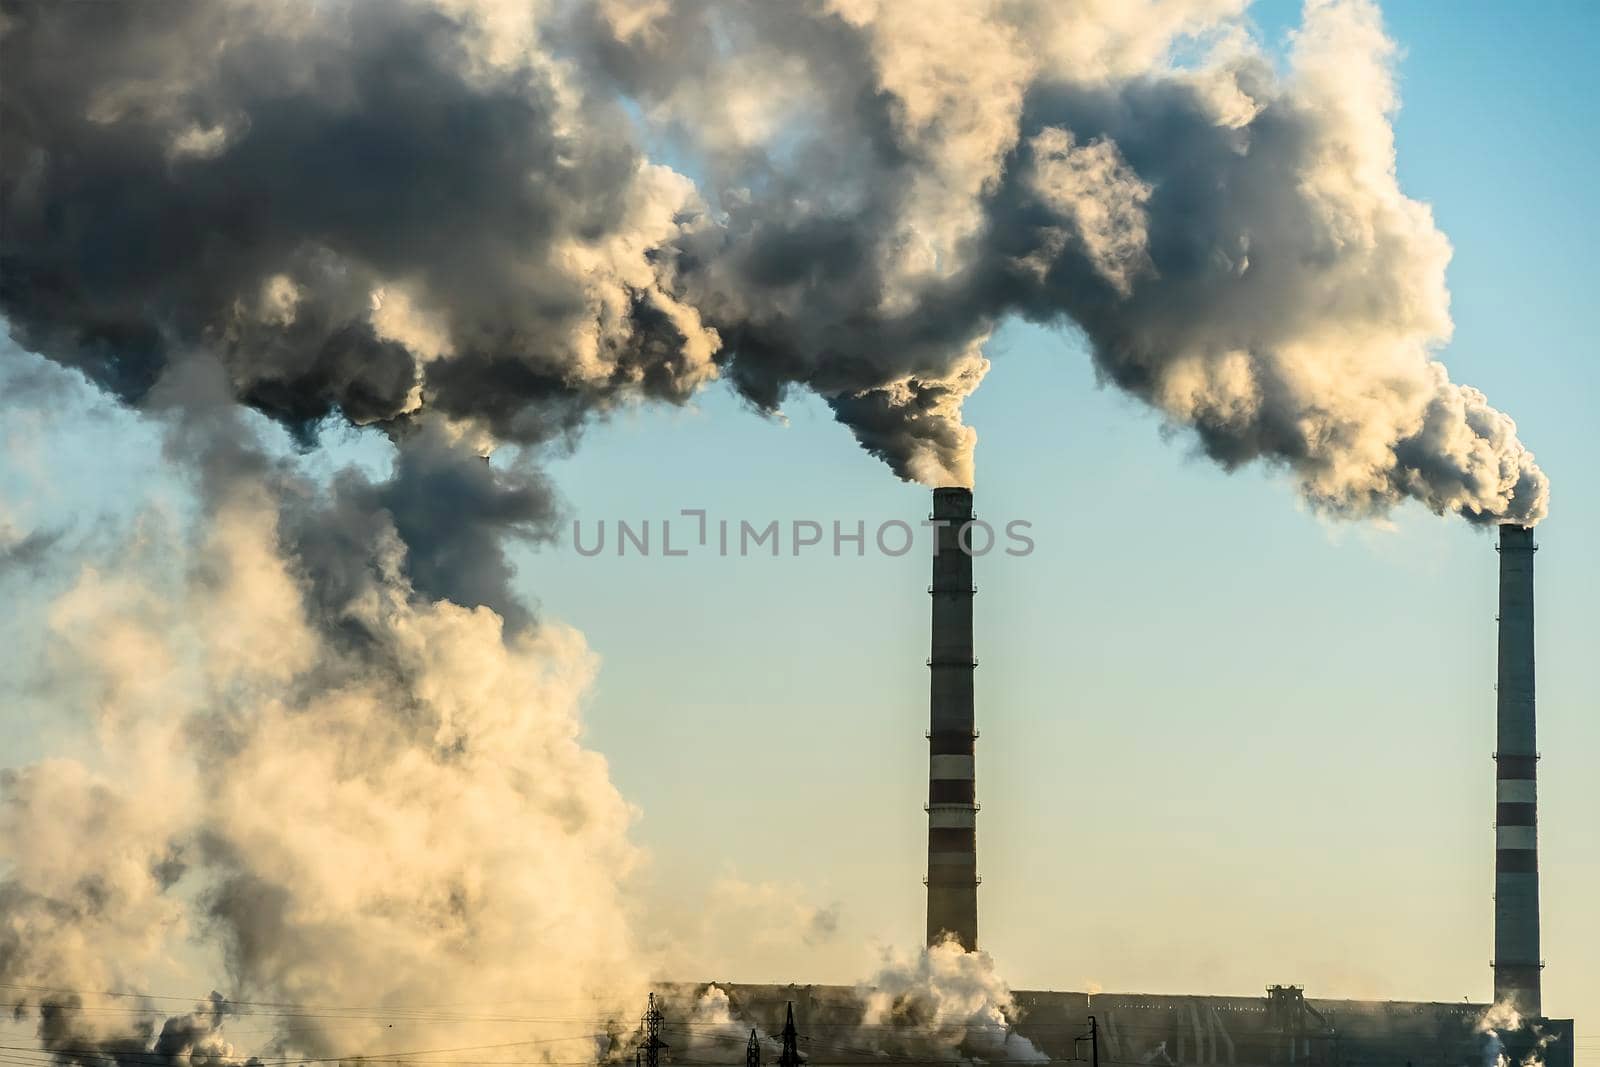 Smoking factory chimneys with co2 emissions.Environmental problem of environmental and air pollution.Climate change,ecology, global warming.The sky is smoky with toxic substances.Soot from factories by YevgeniySam